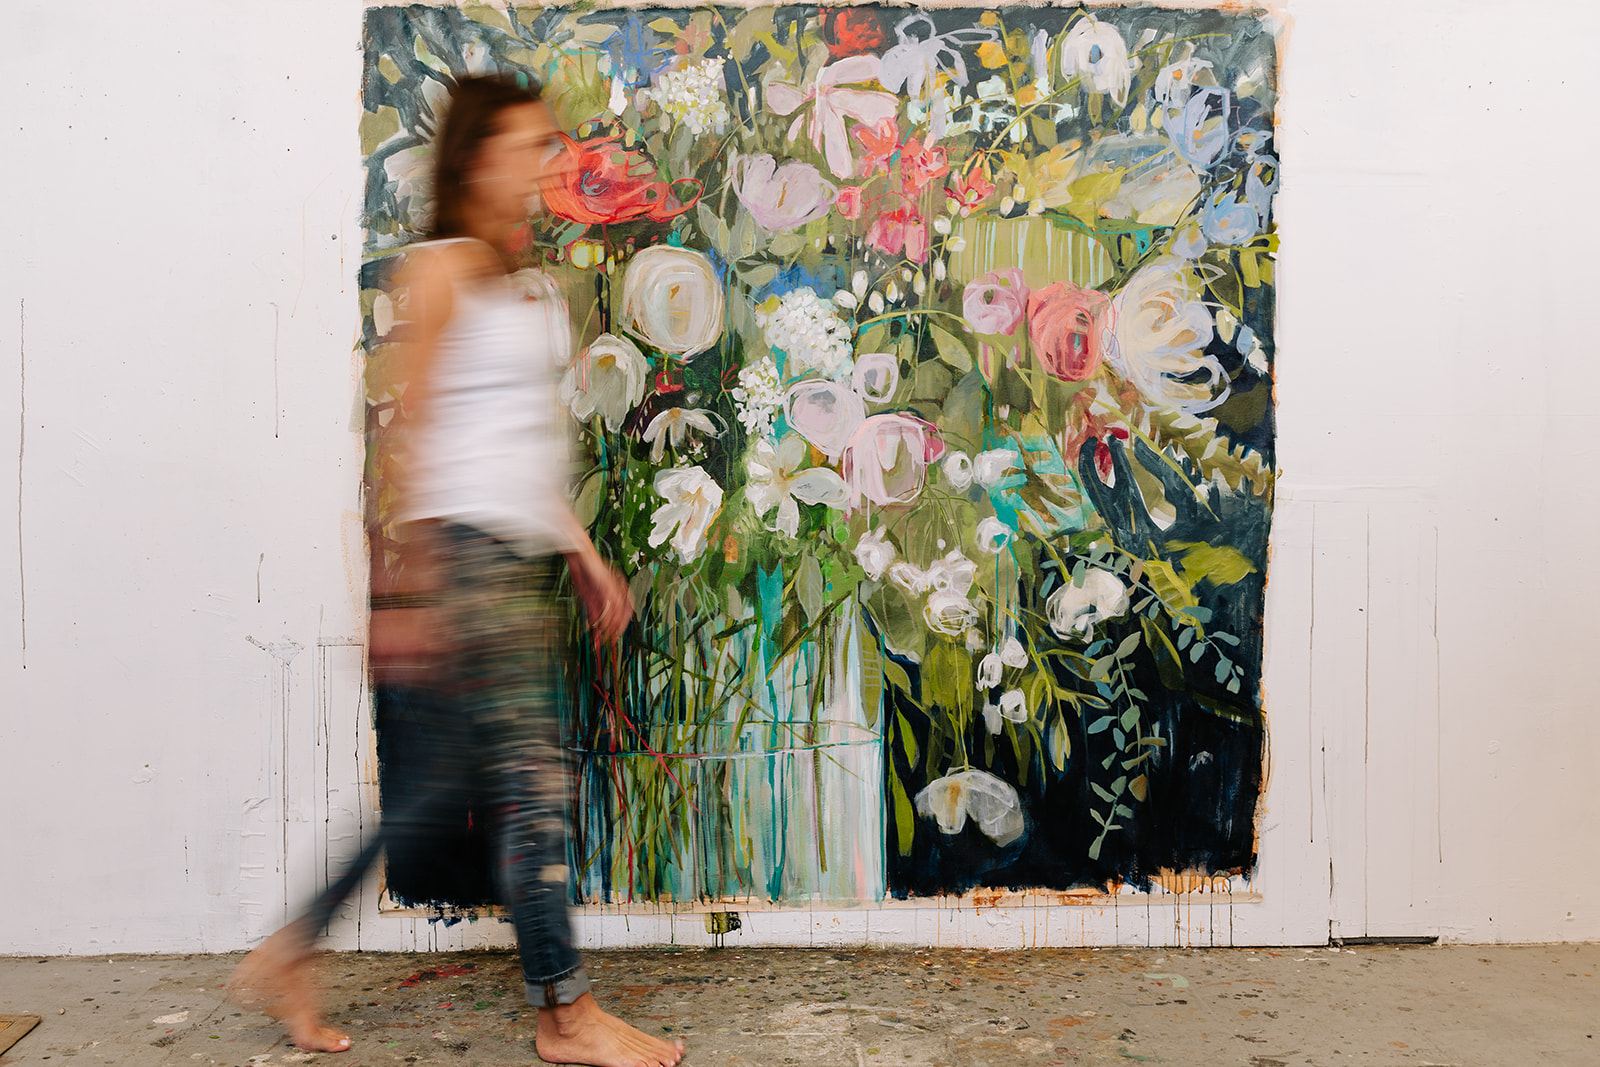 blurry woman walking past giant floral canvas